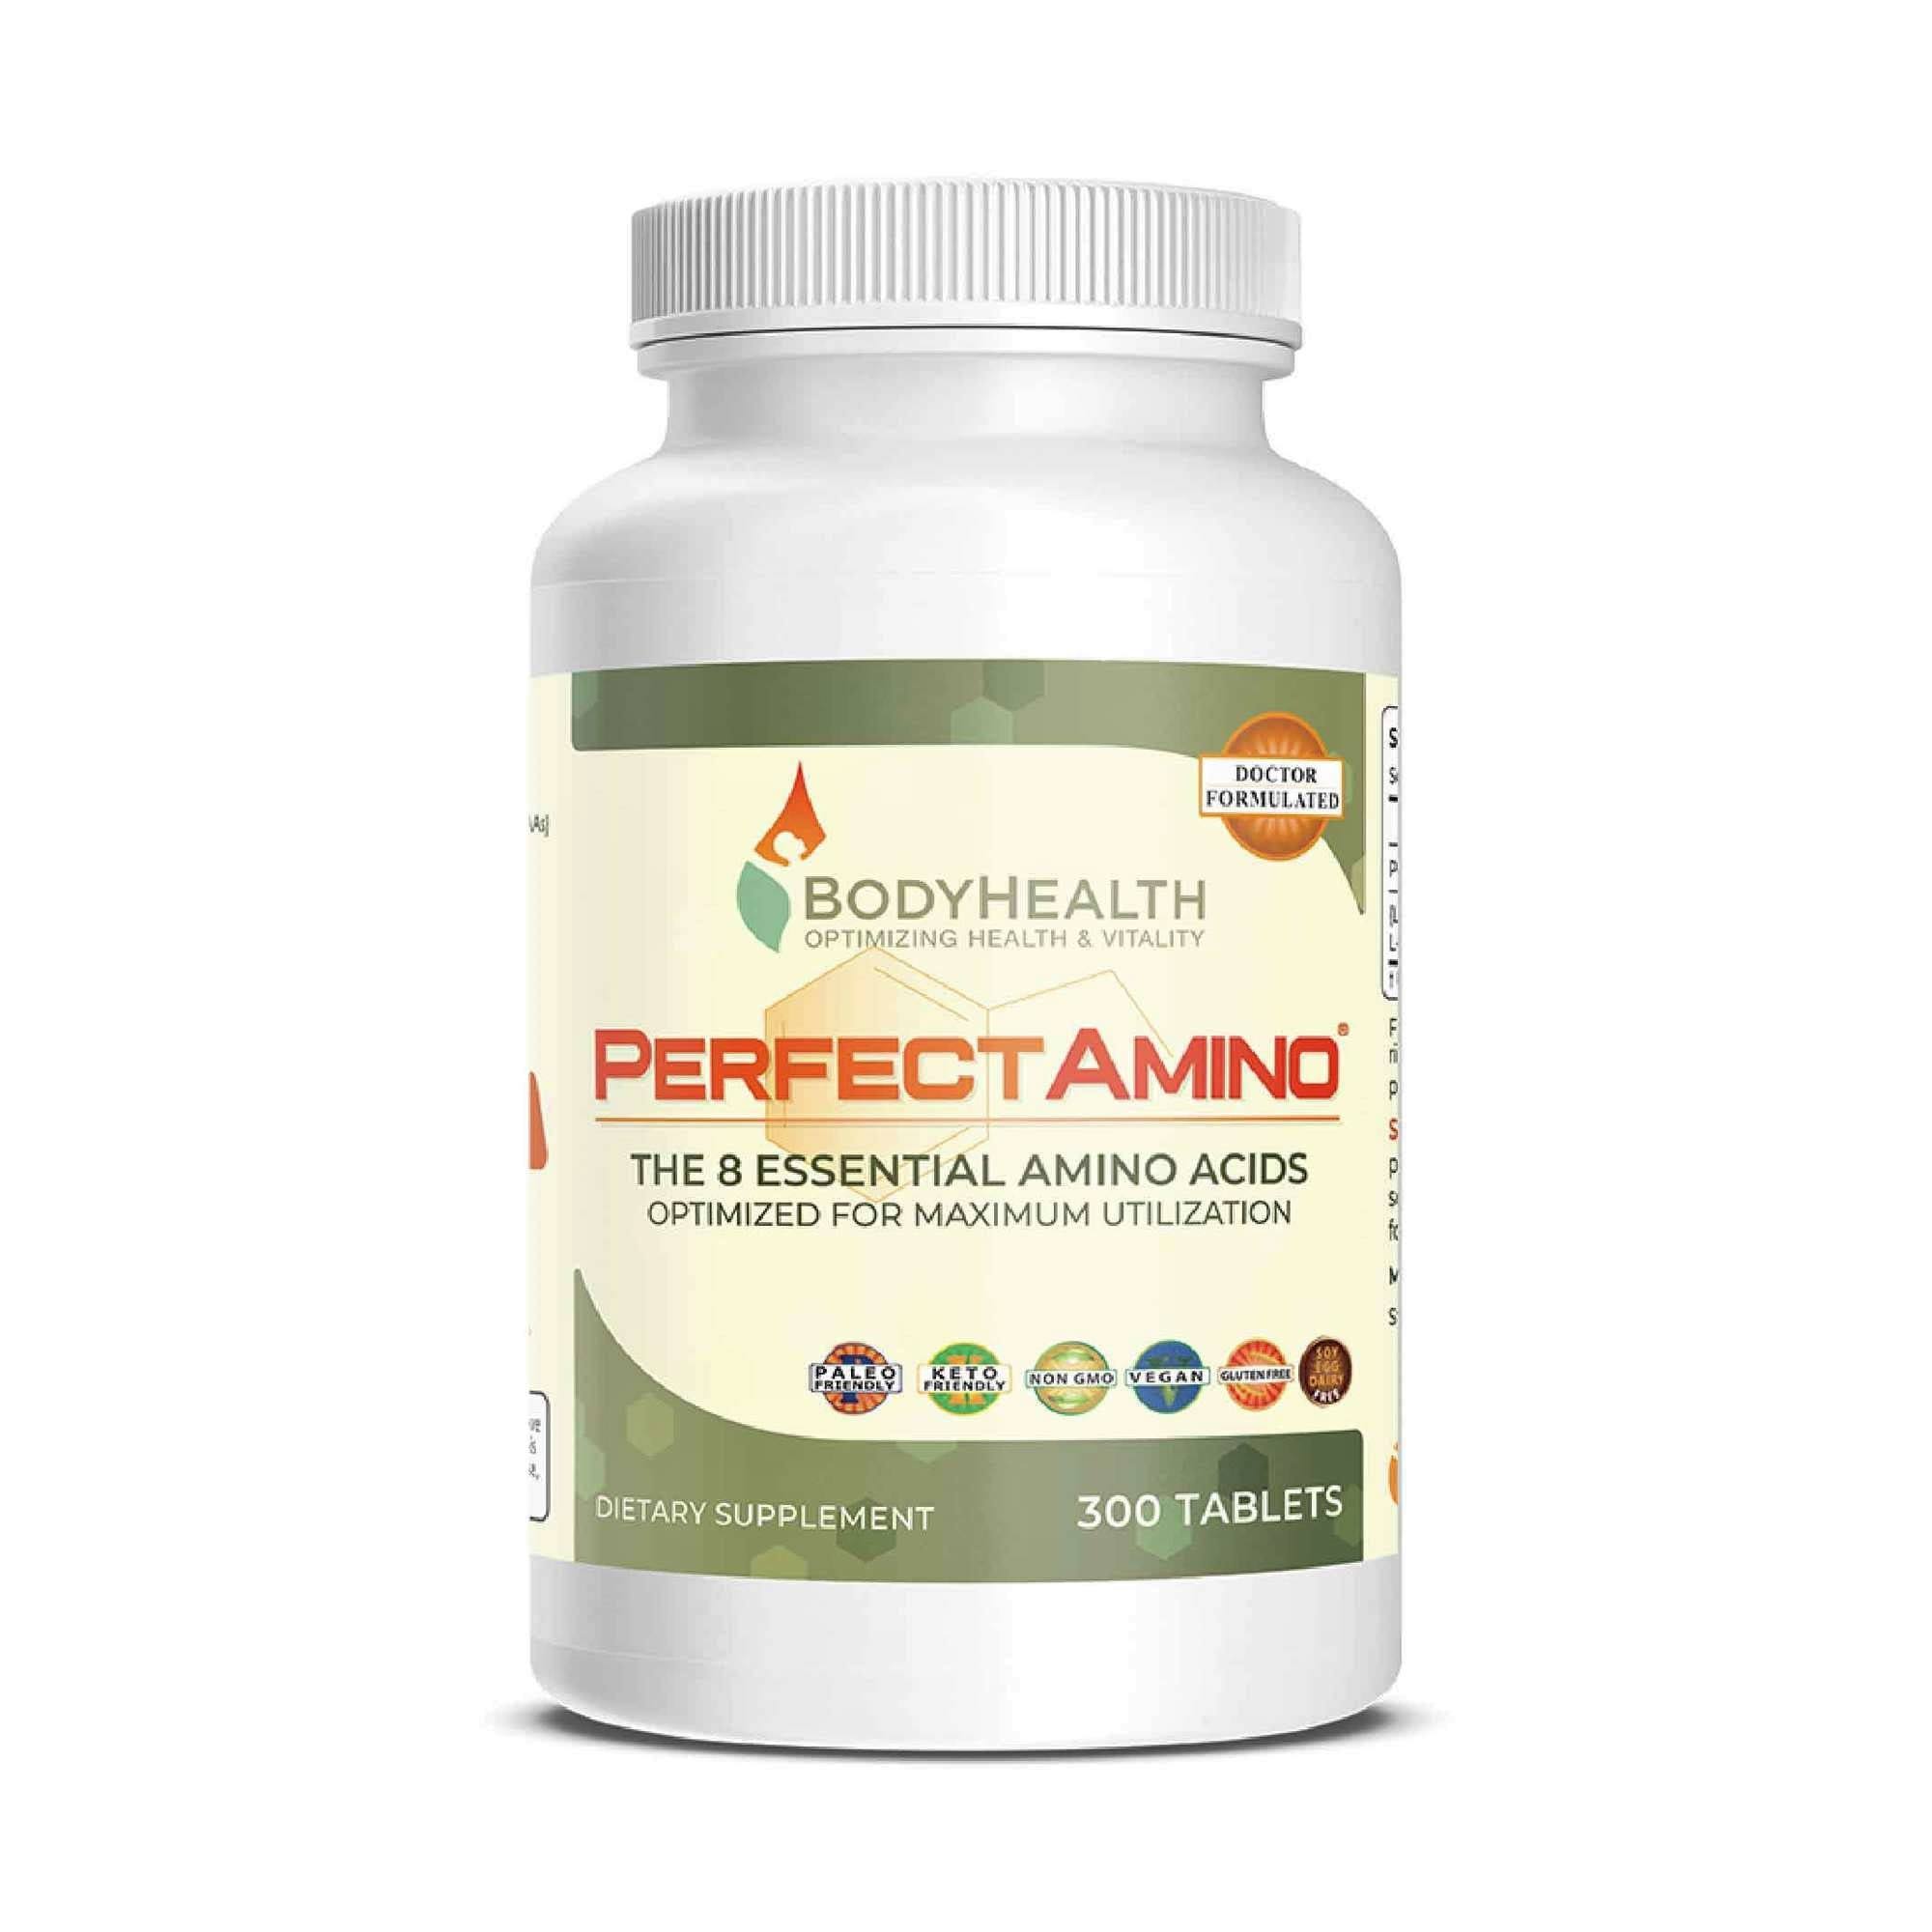 BodyHealth PerfectAmino Supplement - 300 Tablets